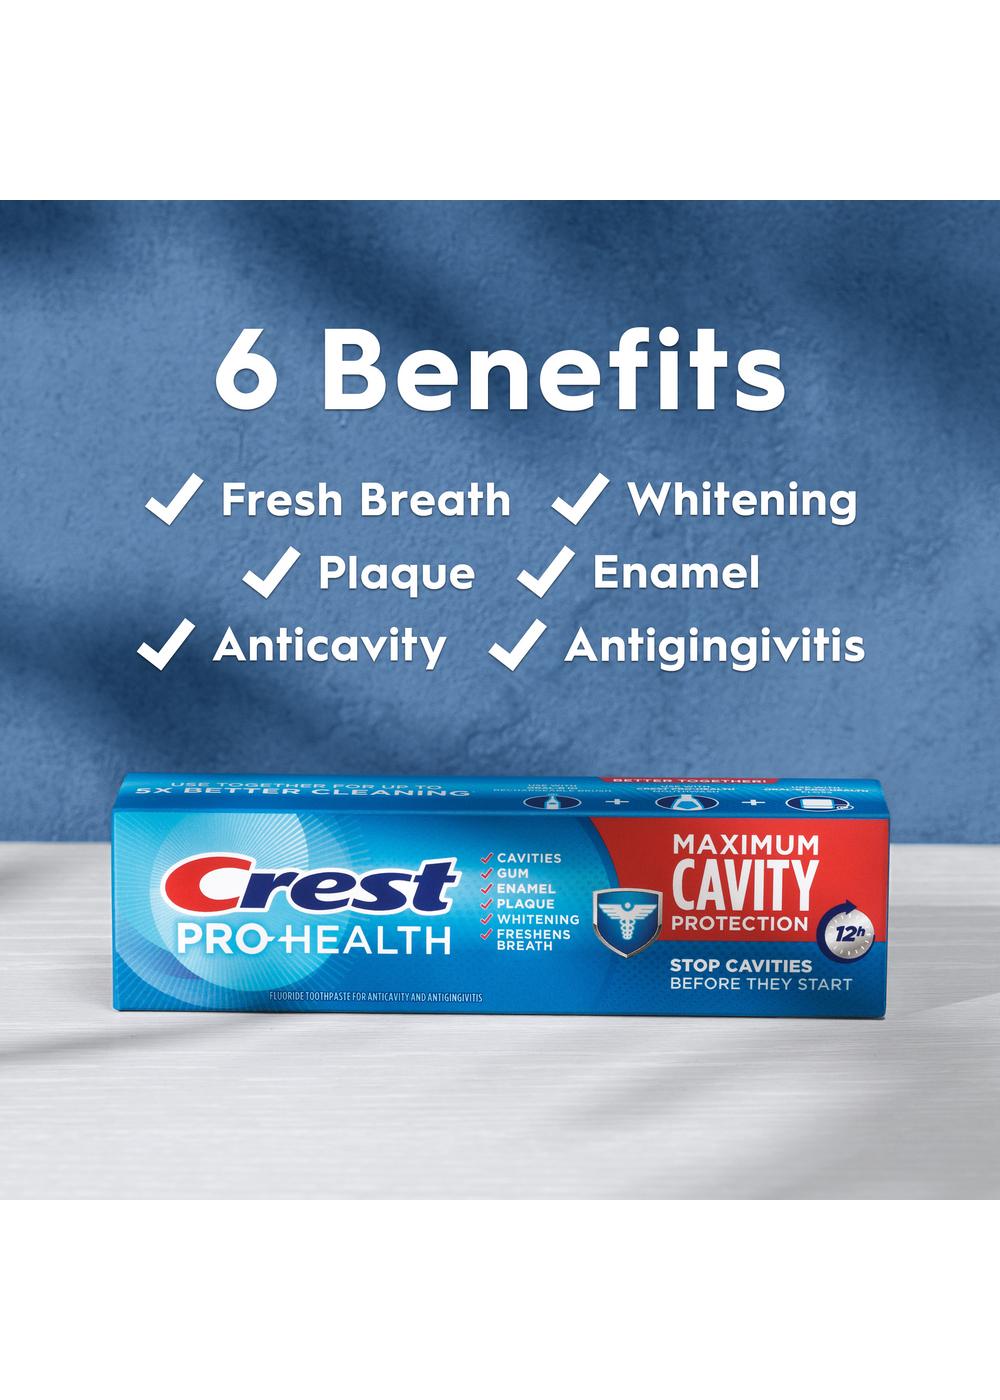 Crest Pro-Health Maximum Cavity Protection Toothpaste; image 8 of 9